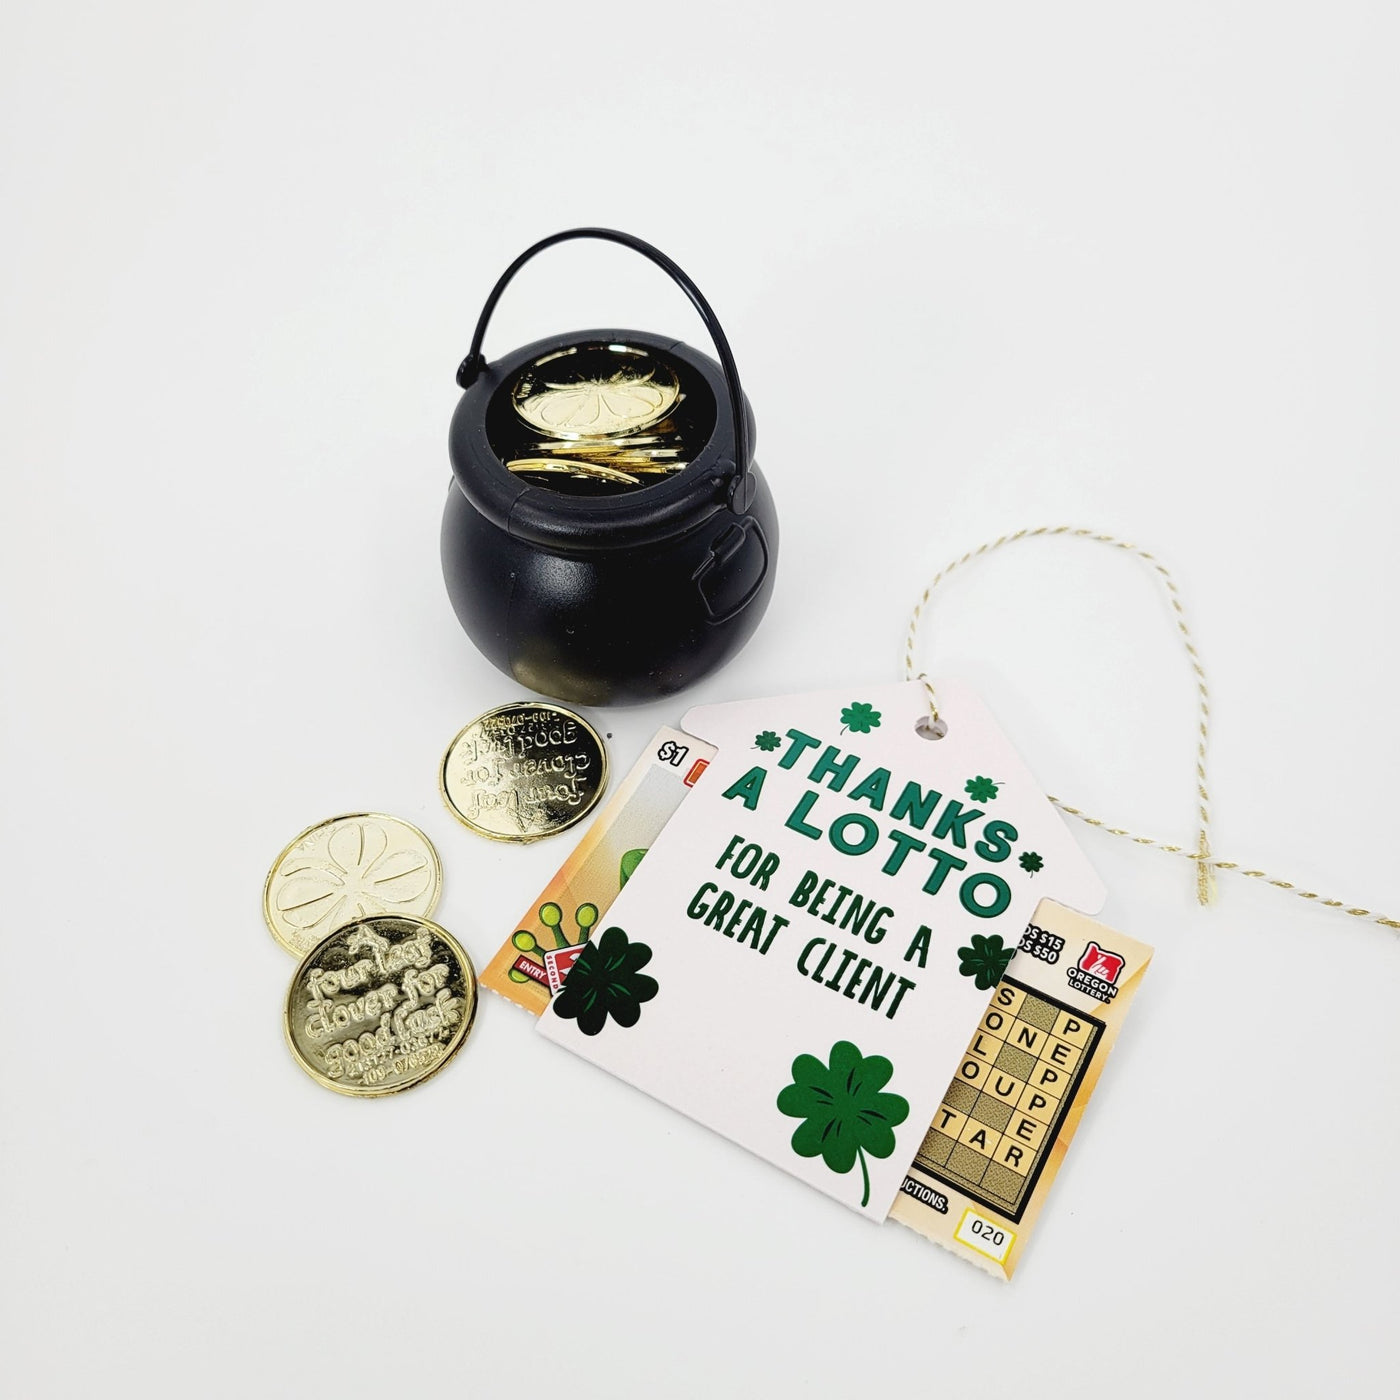 Lottery Ticket Holder - St. Patrick's Day - Thanks a Lotto - All Things Real Estate